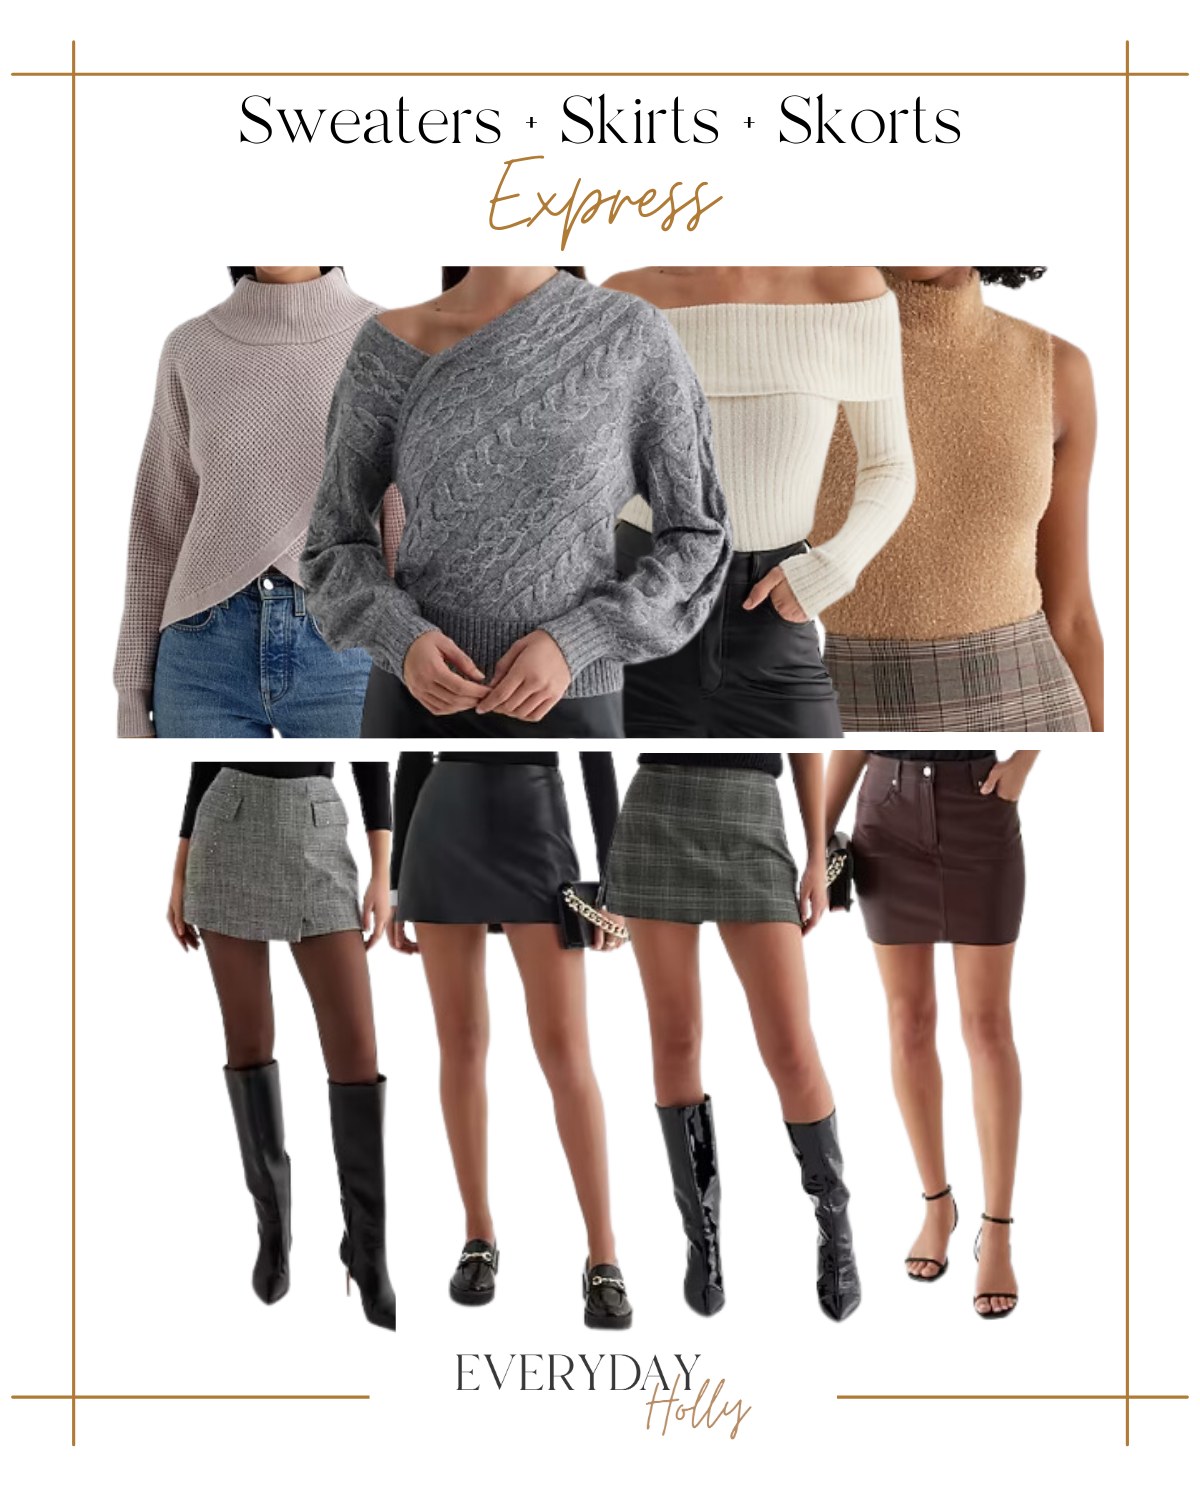 shop last minute thanksgiving outfit ideas and decor | #shop #thanksgiving #thanksgivingoutfit #homedecor #falloutfit #fallfashion #sweater #mockneck #neutral #skirt #skort #fauxleather #express